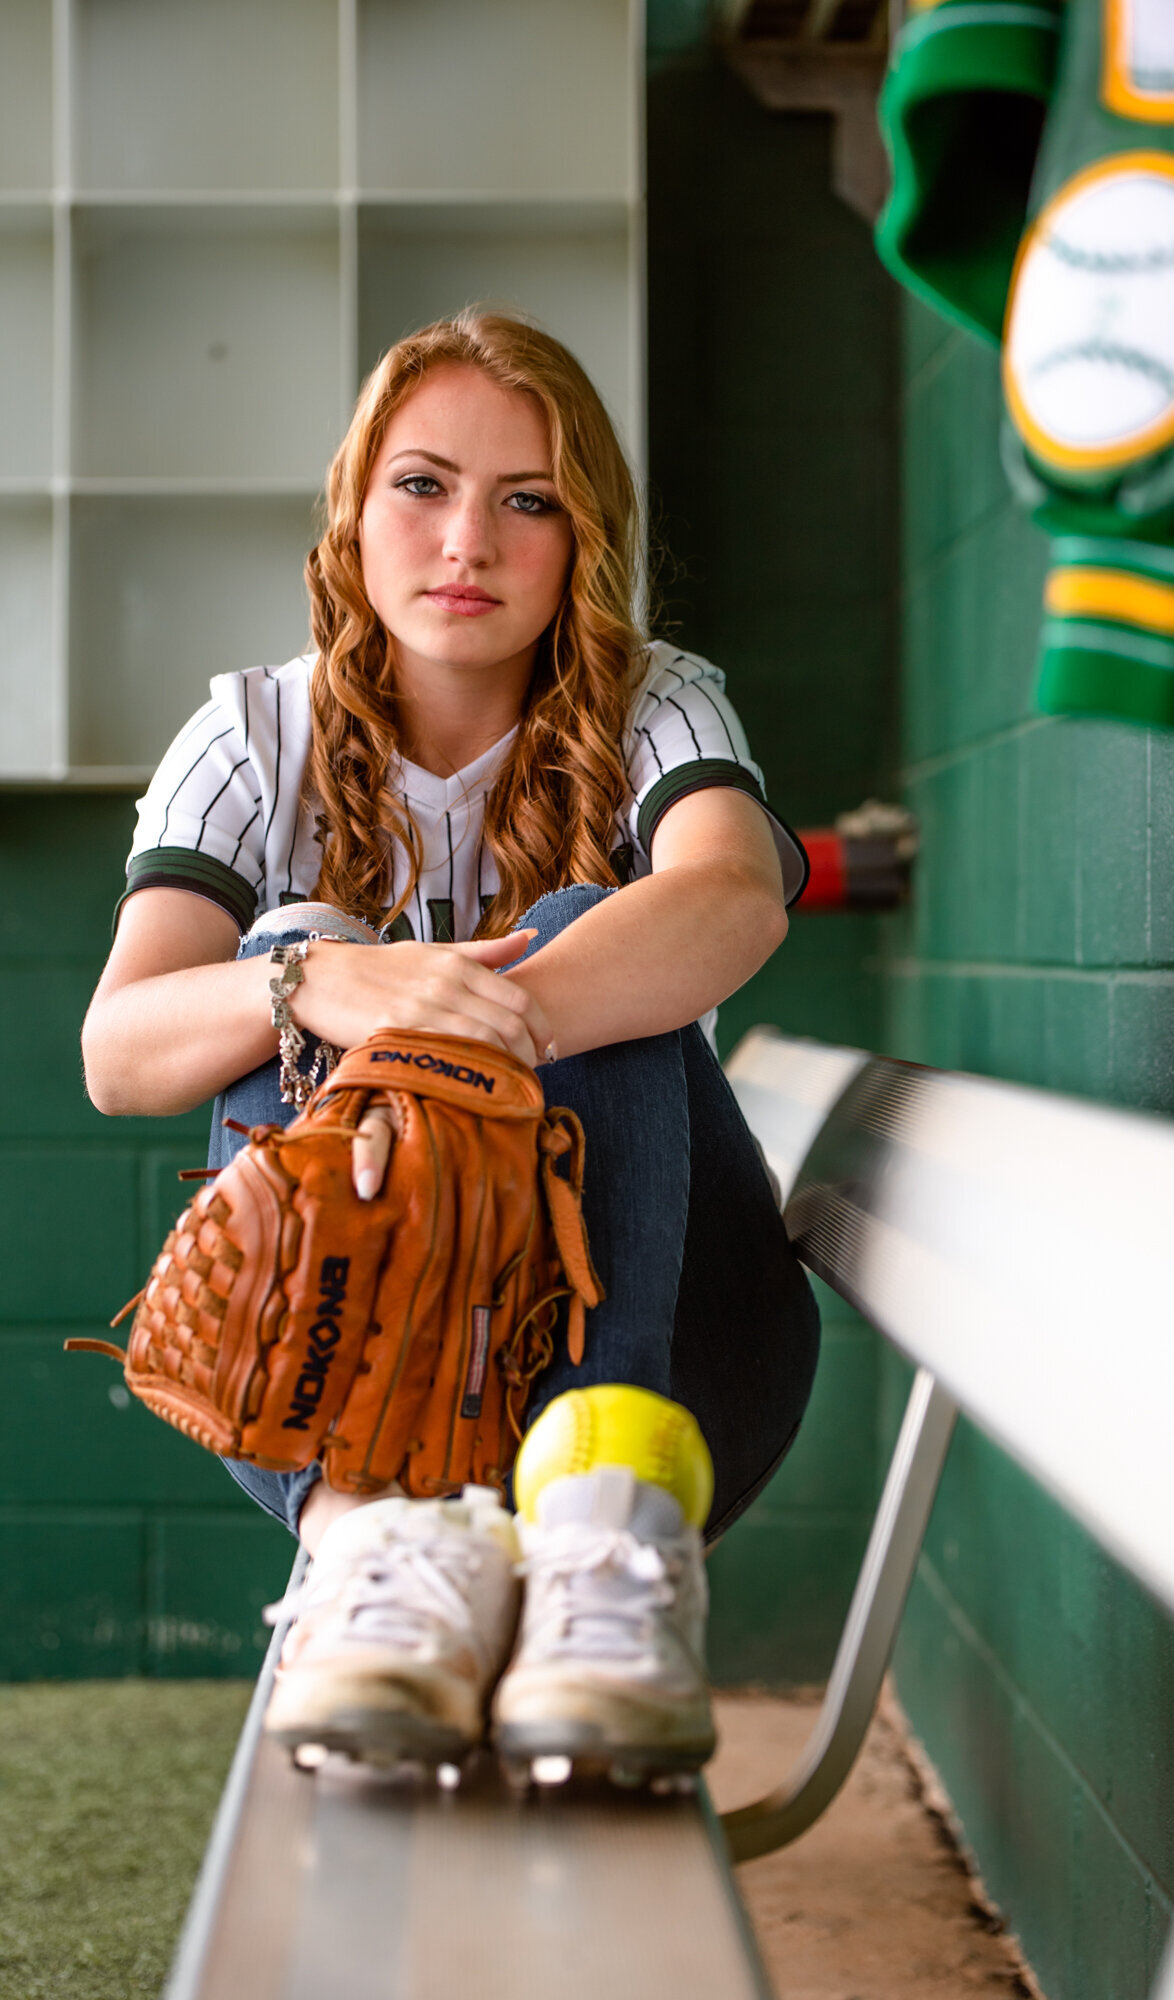 A softball player with red hair sits on a dug out bench with her cleats, ball, glove, and letterman.